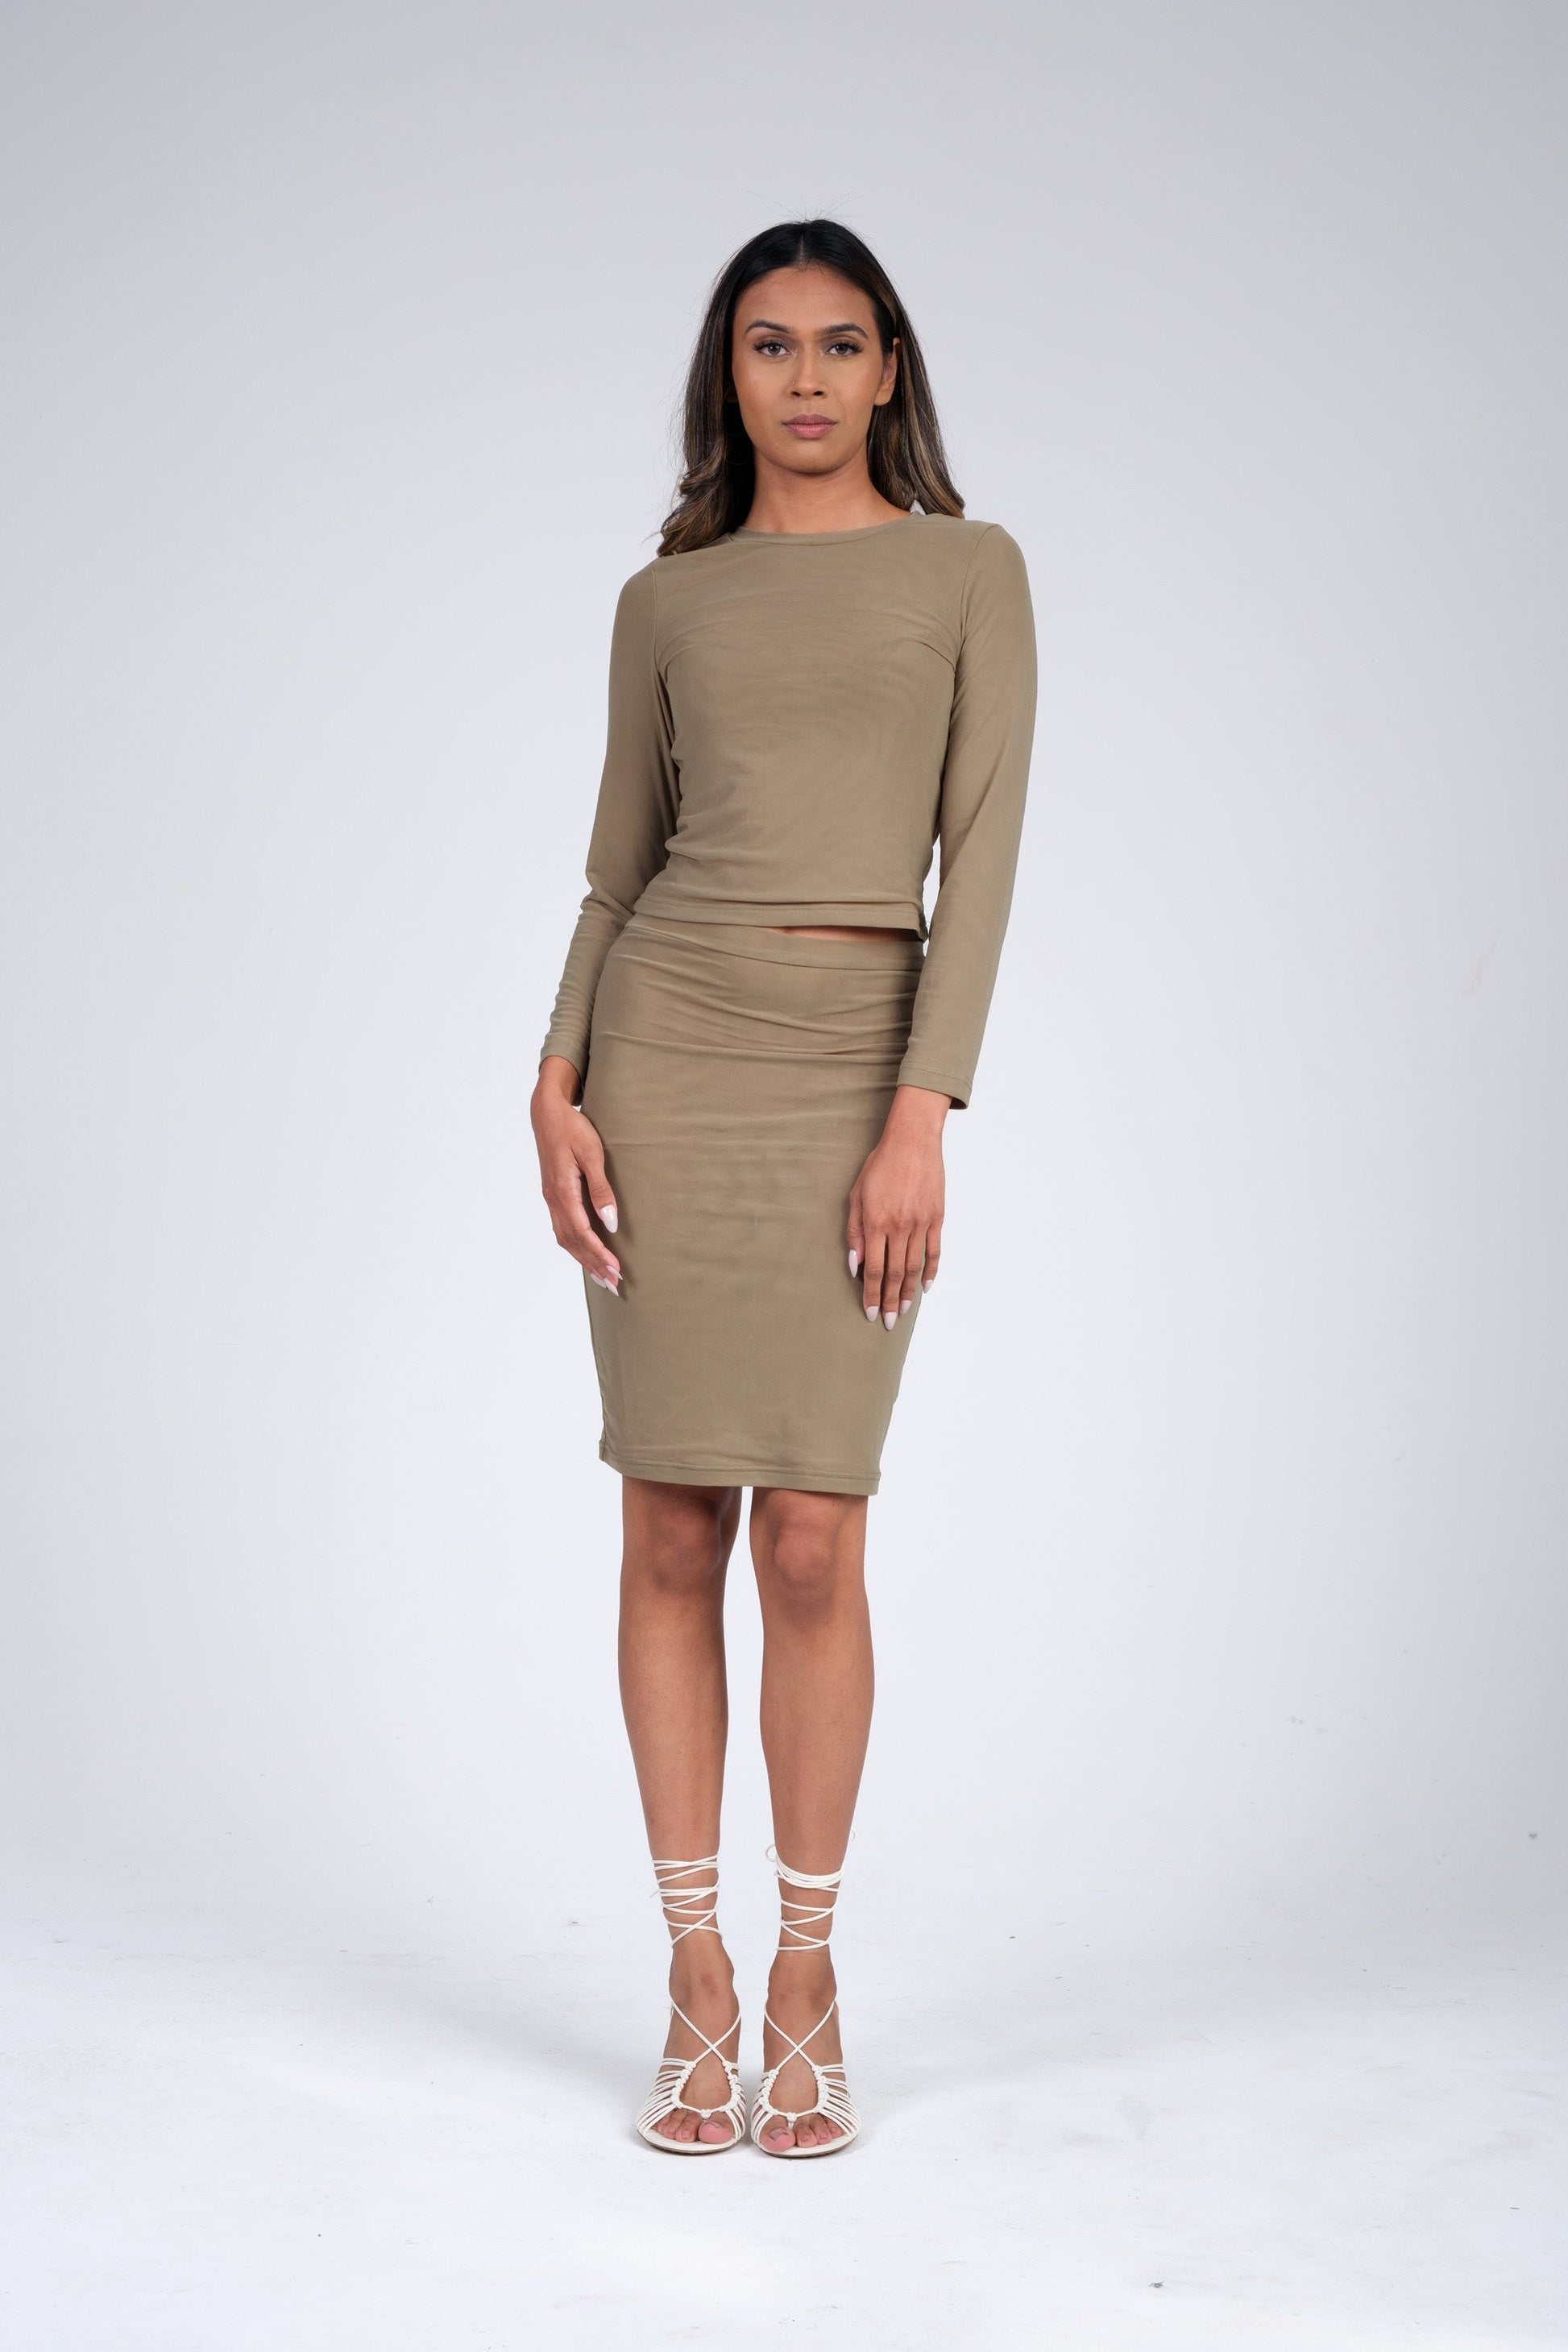 Mesh skirt in olive with matching mesh top